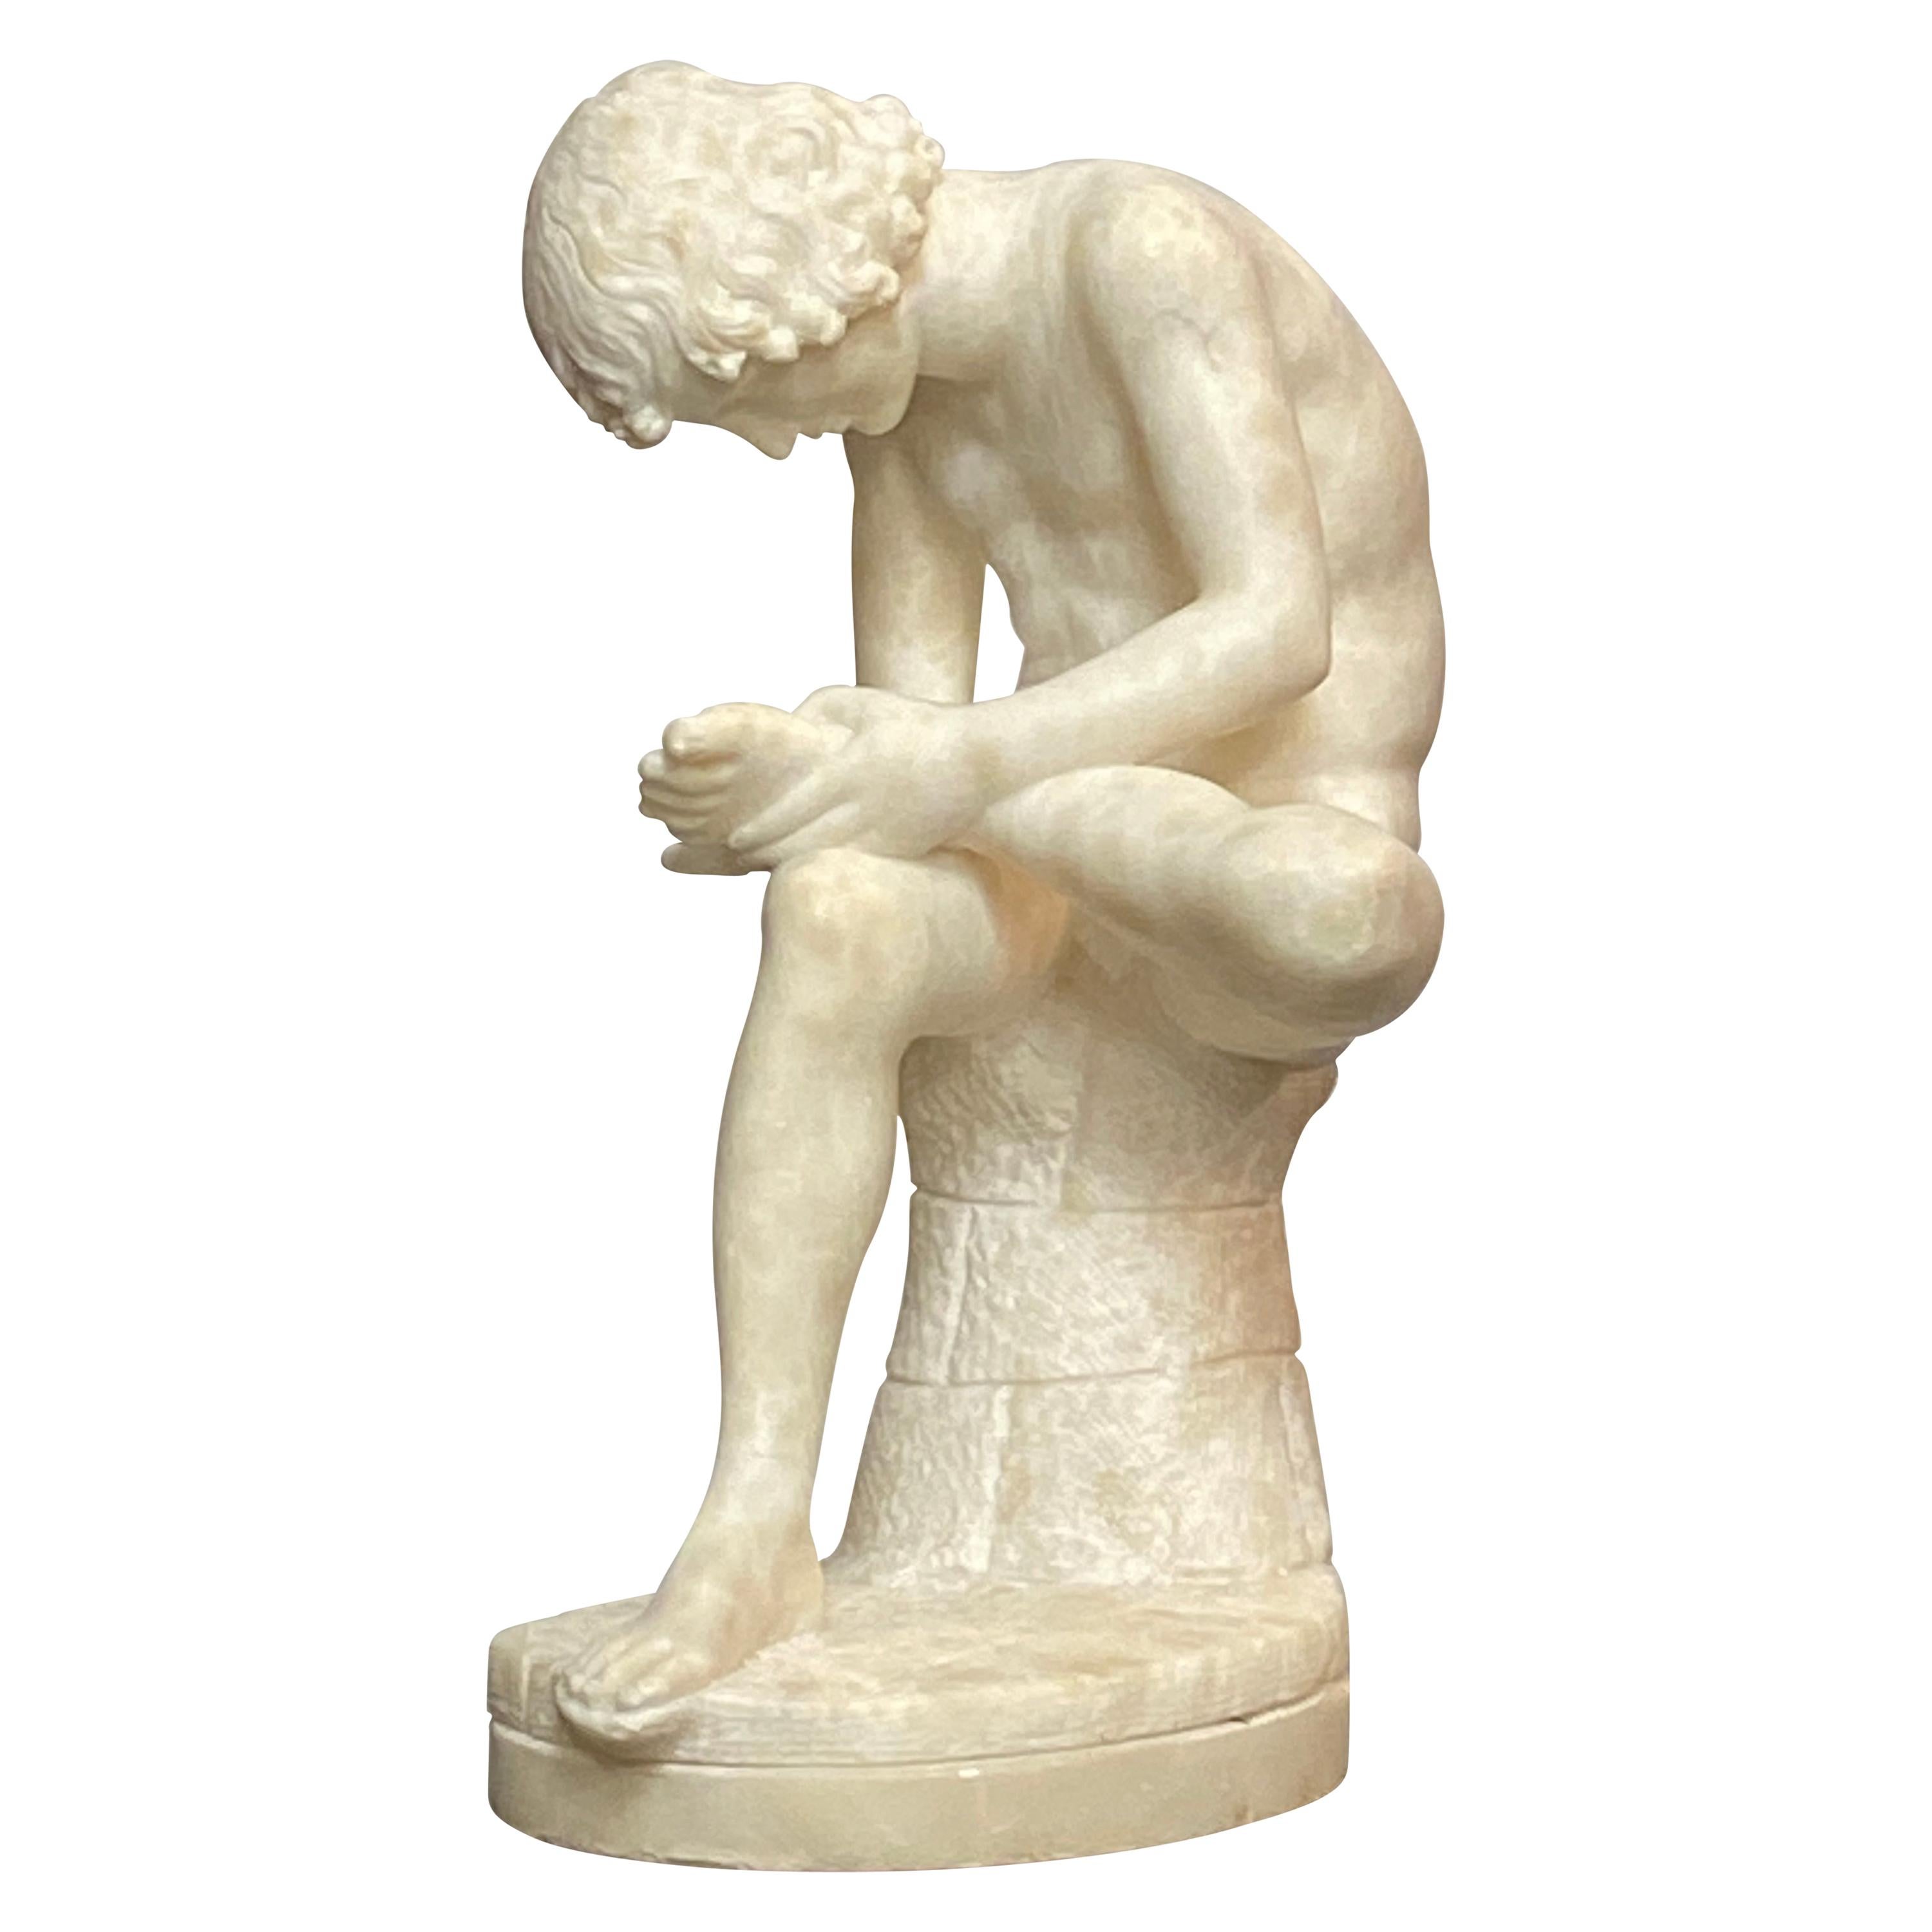 Italian Grand Tour Carved Alabaster Figure "Boy with Thorn"